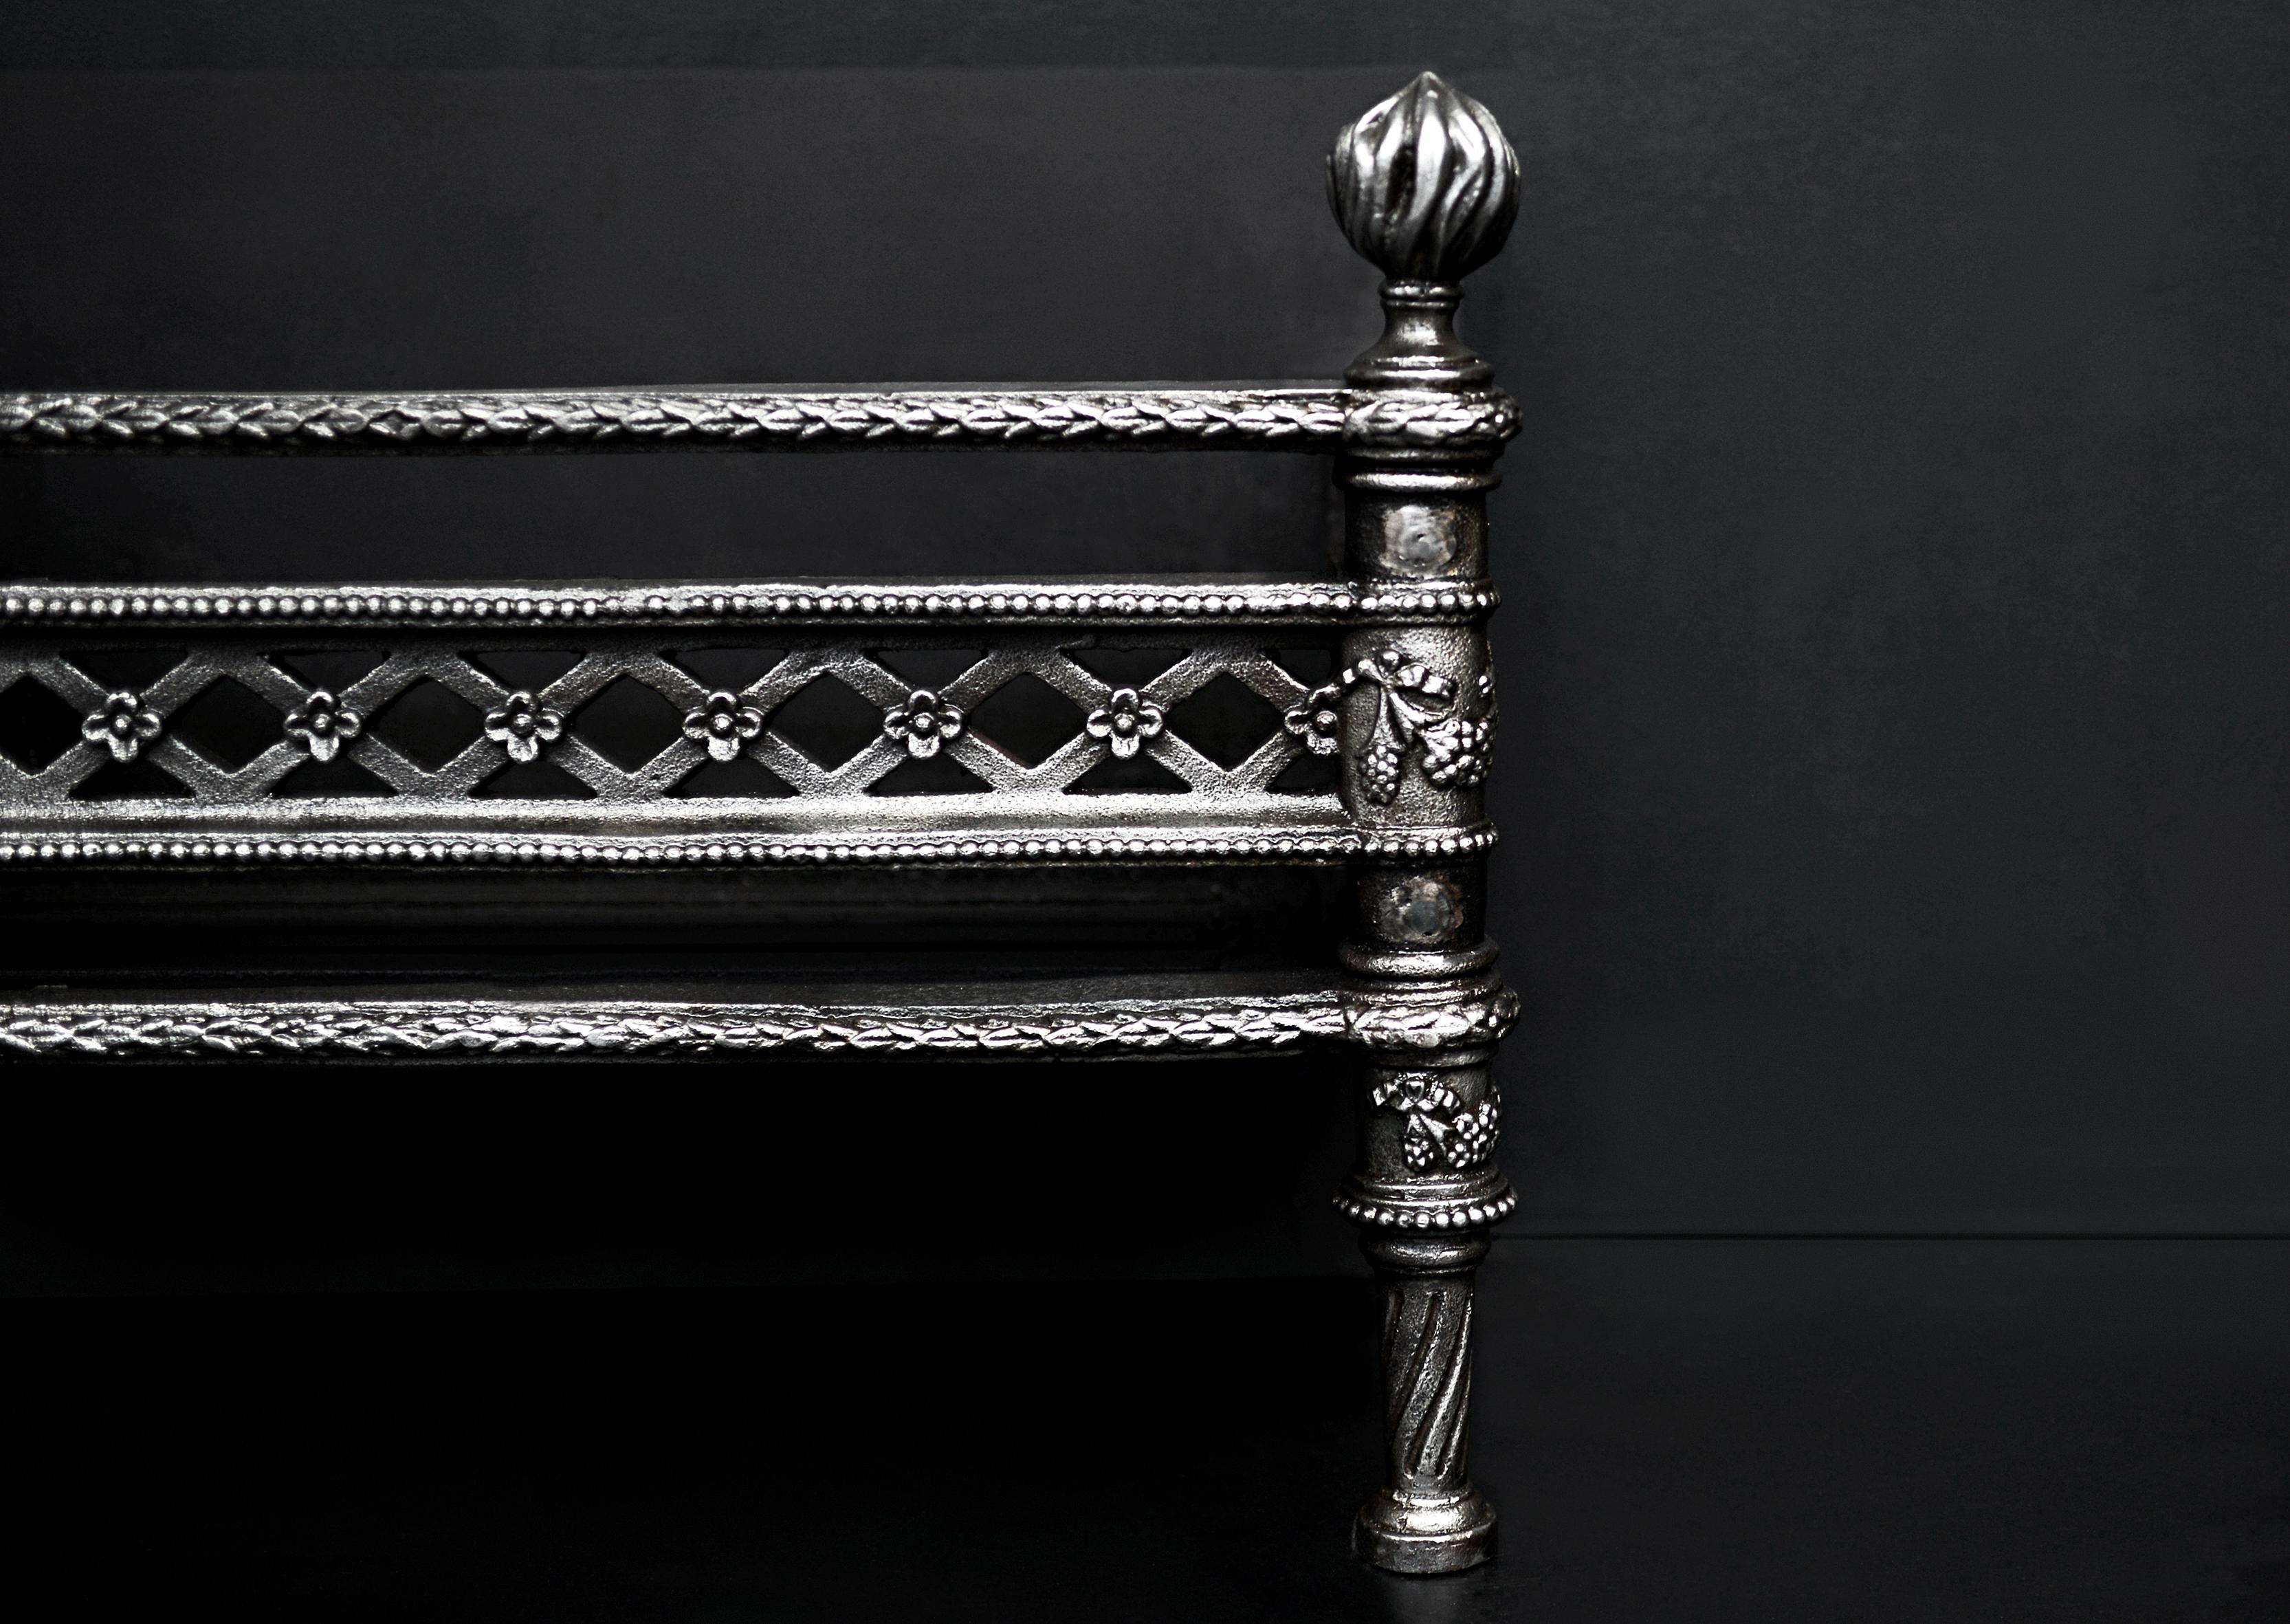 A decorative cast iron fire grate. The legs with beading, foliage, and fruit throughout, surmounted by flamed finals. Plain iron back behind. Modern.

Sizes:
Width at front 555 mm 21 7/8 in
Width at back 564 mm 22 1/4 in
Height 412 mm 16 1/4